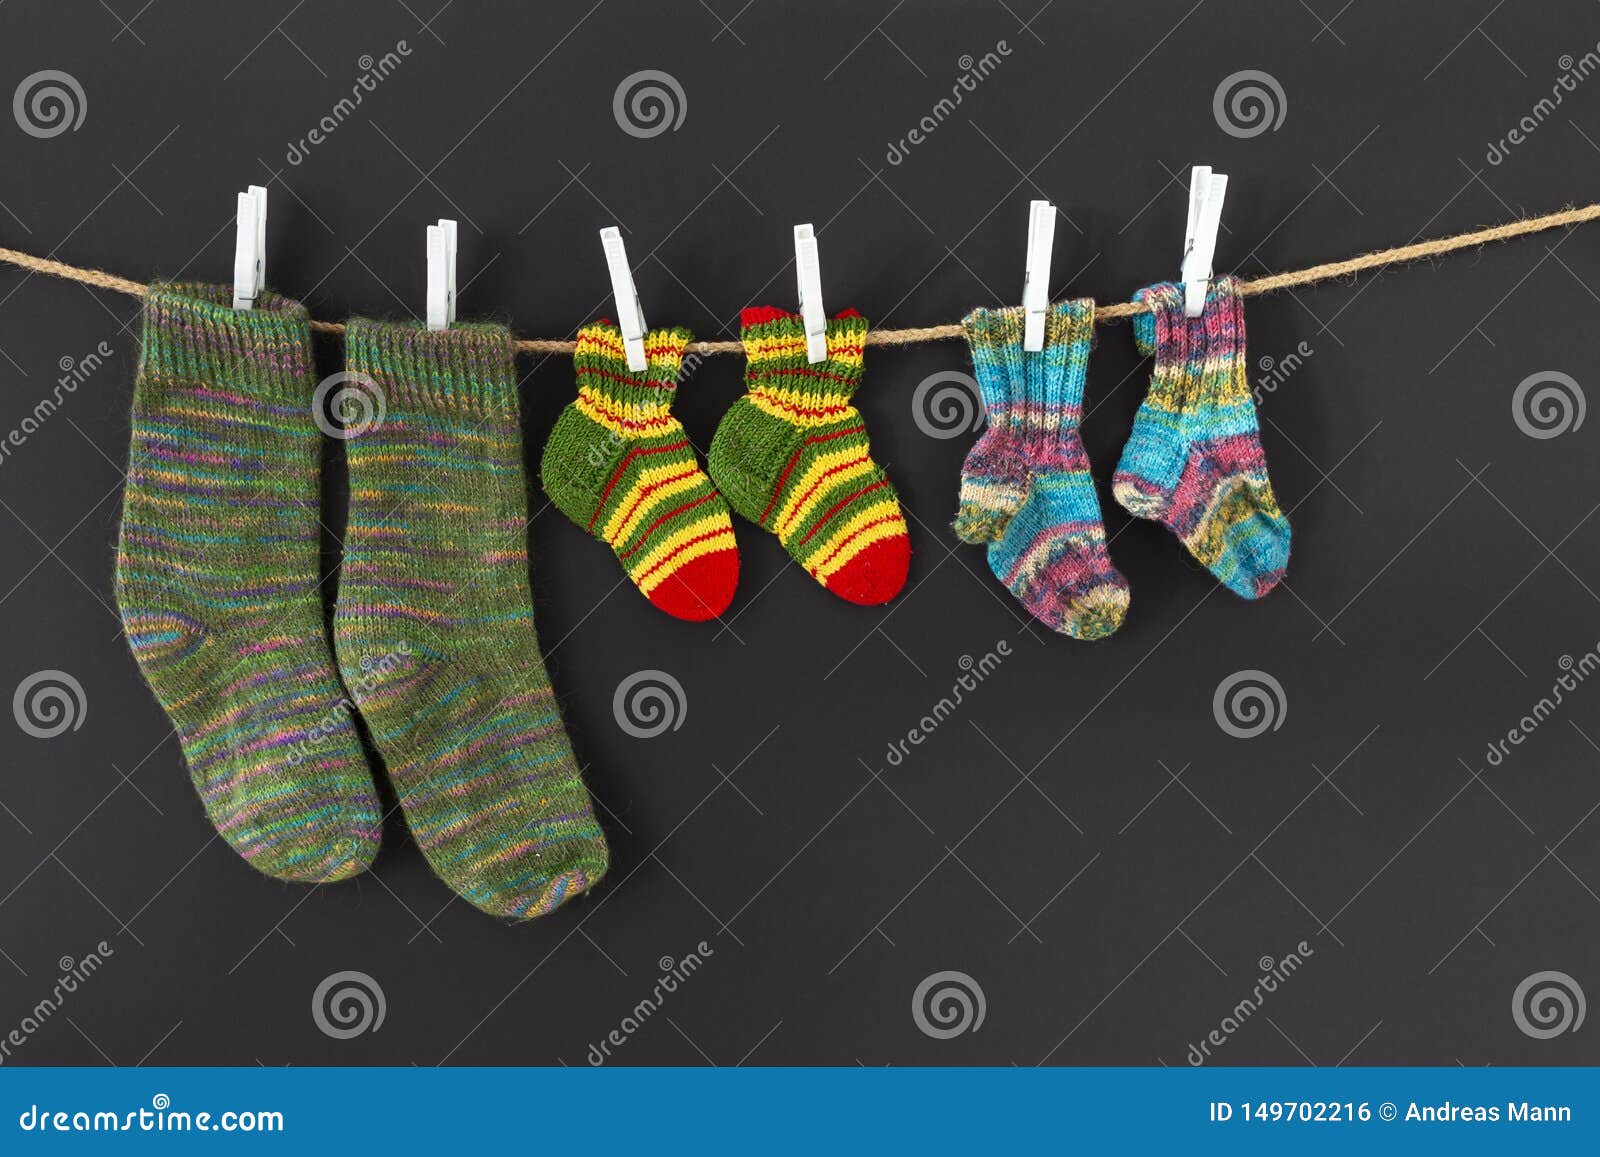 Colorful Woolen Socks On A Rope On Black Background Stock Photo - Image ...